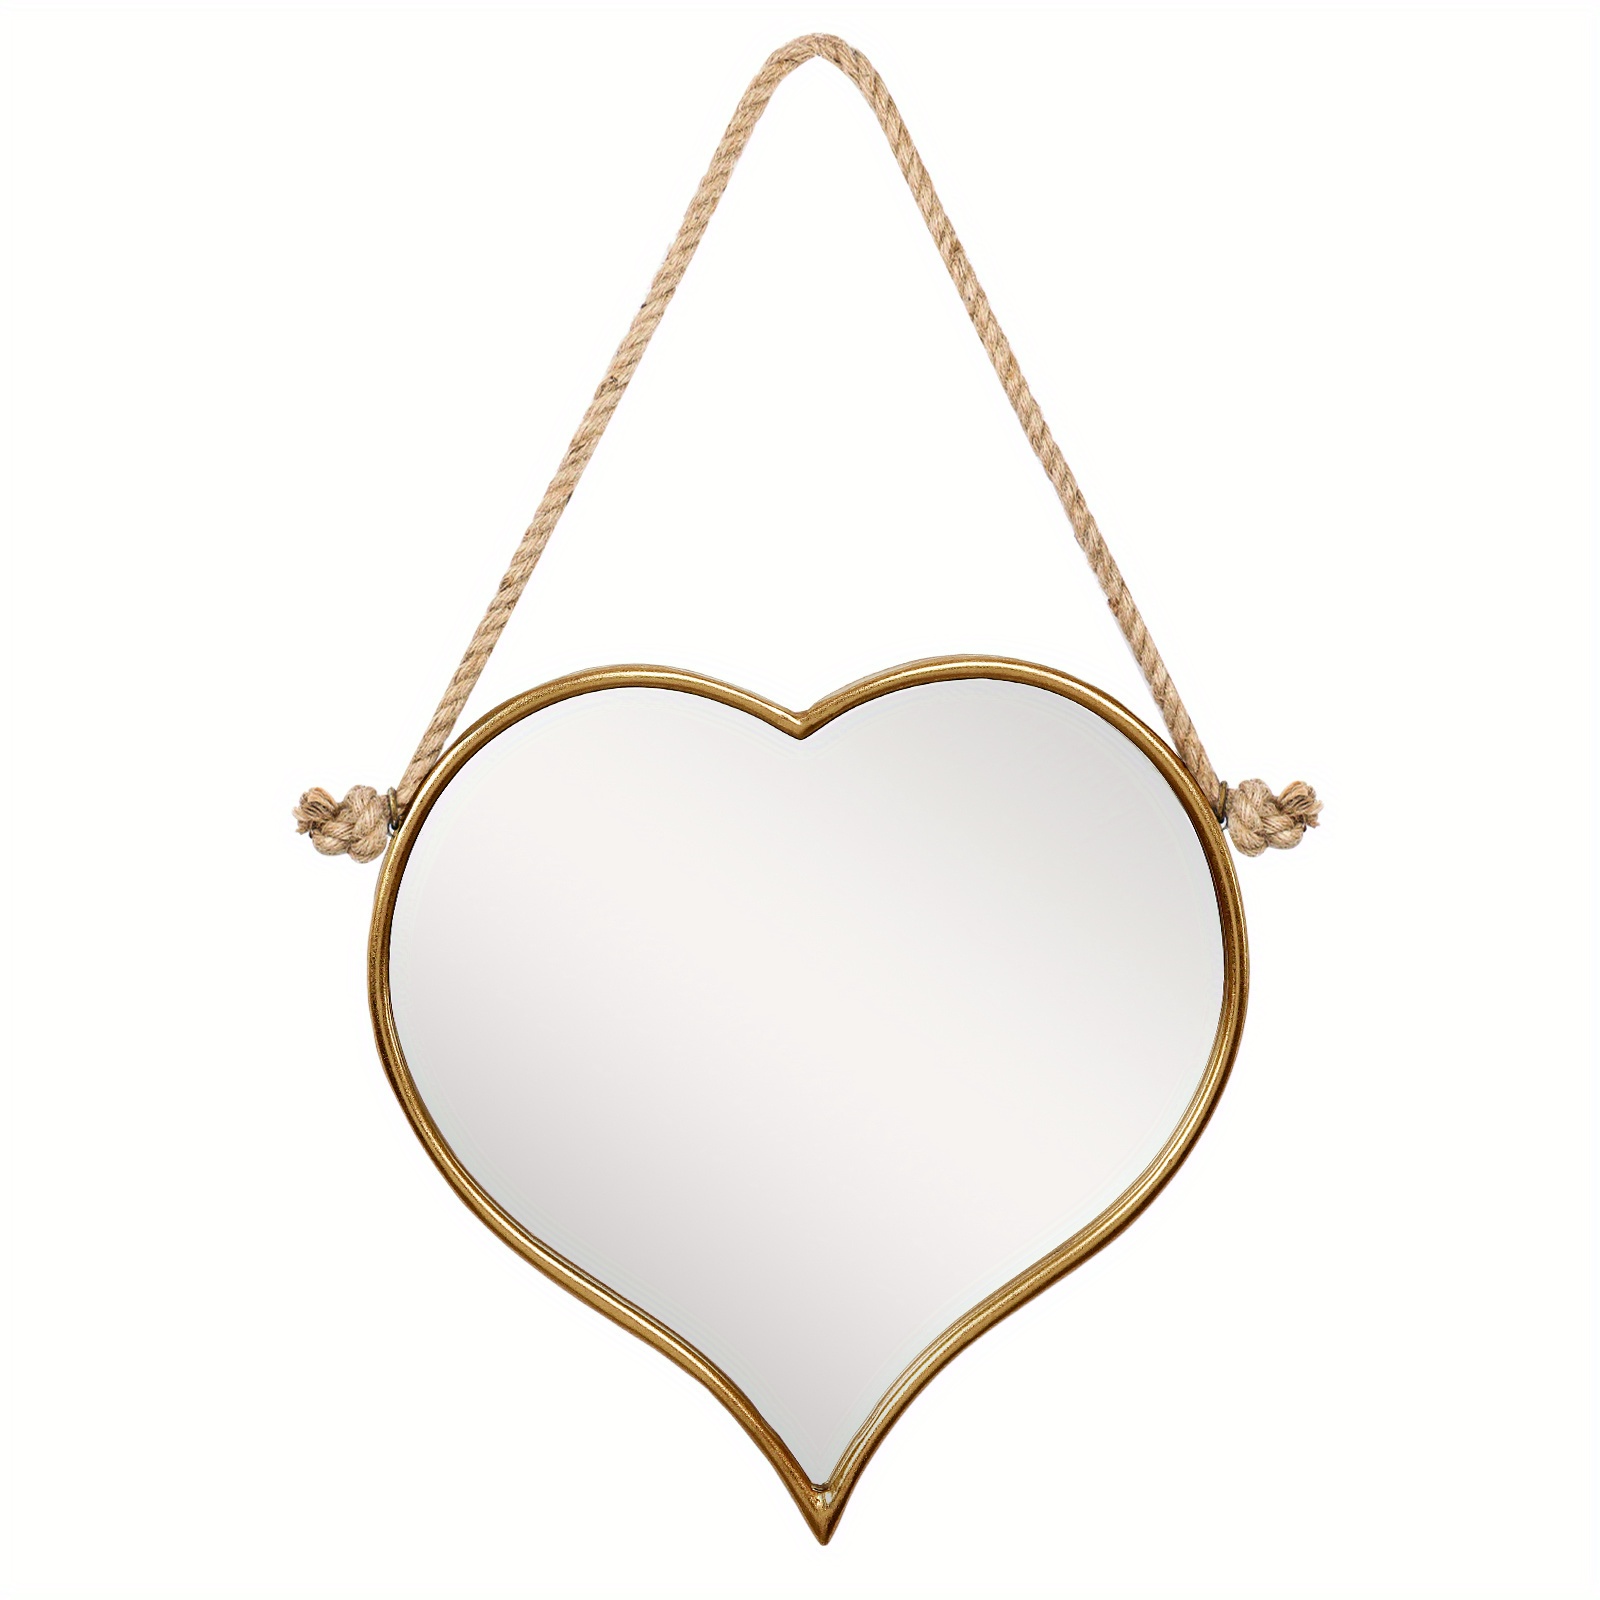 1pc 43.18 Cm Heart Shaped Wall Mirror, Silver Metal Frame Make Up Mirror, Wall Mounted Mirror With Hanging Rope For Home Decor